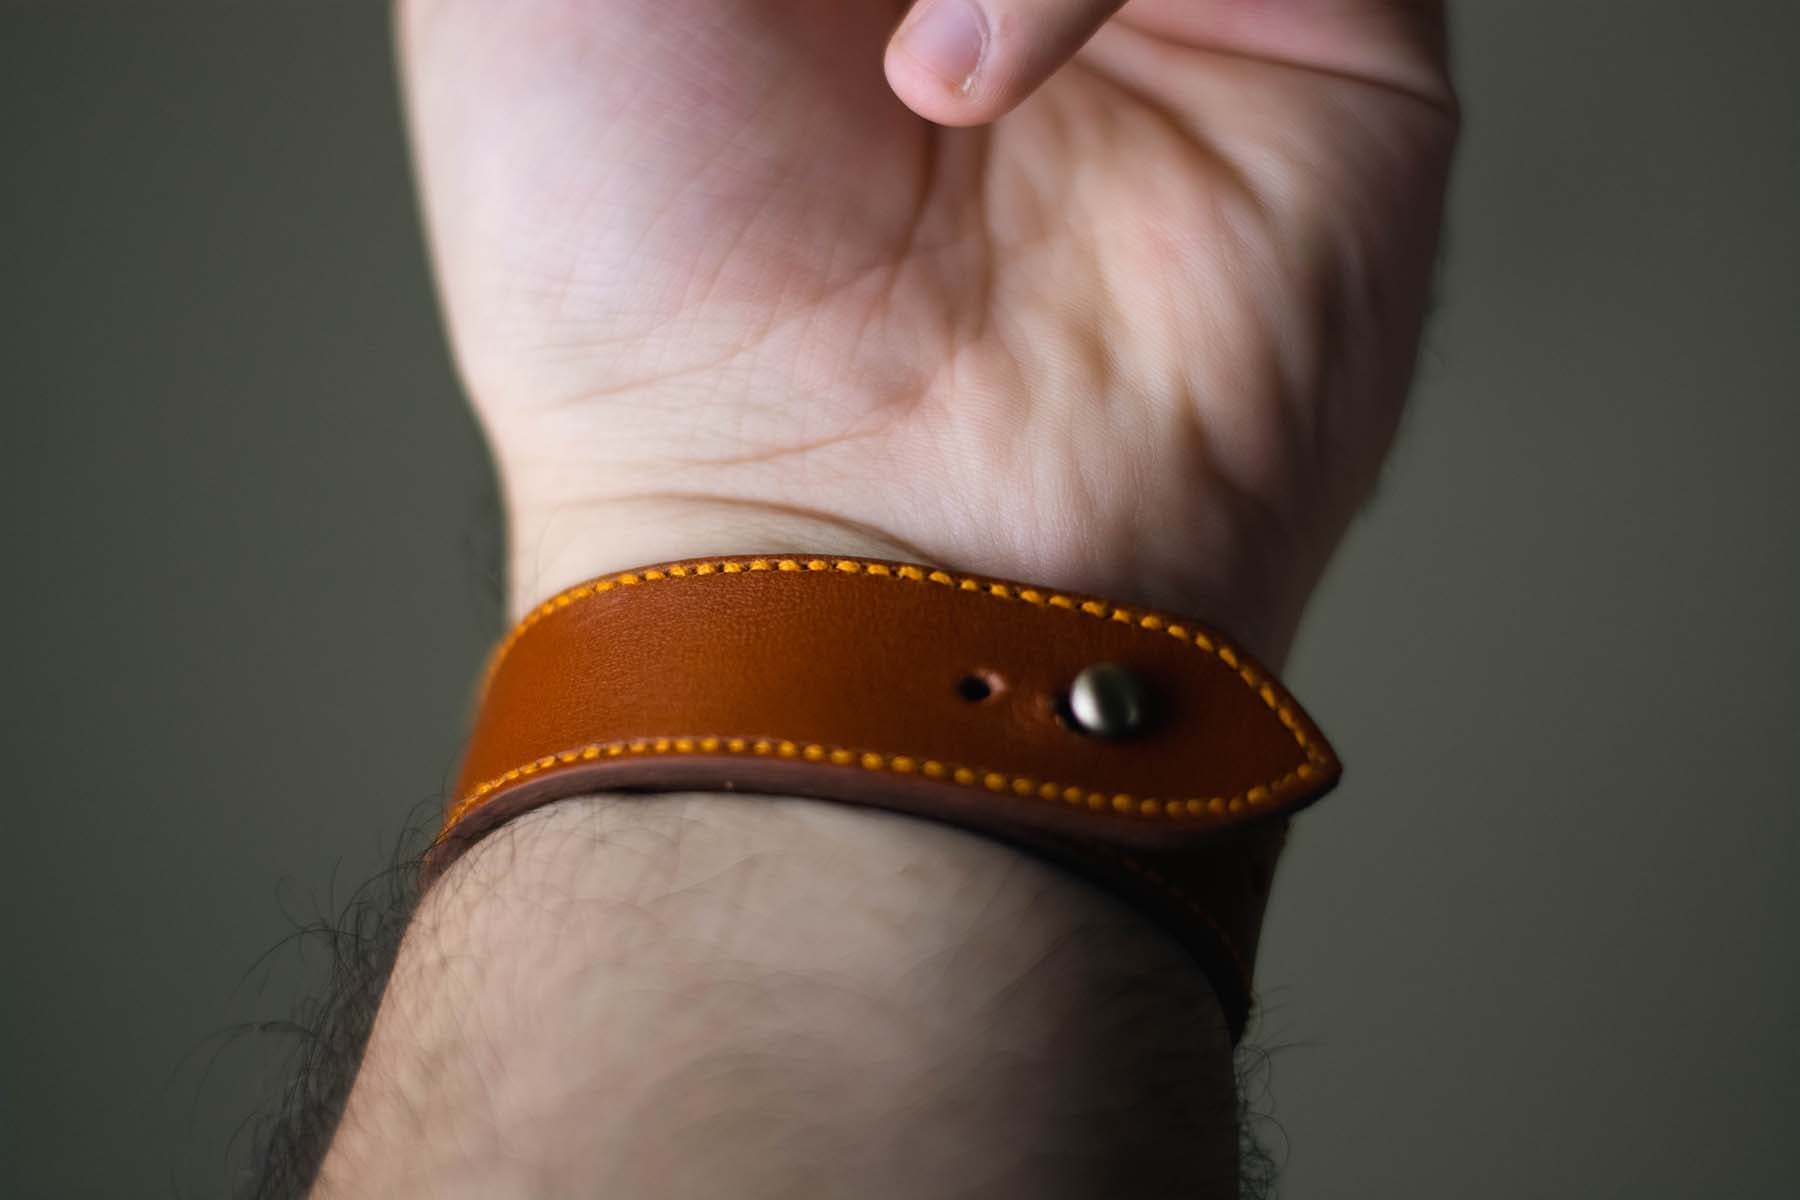 Tanned Leather Watch Strap - The Hermoso